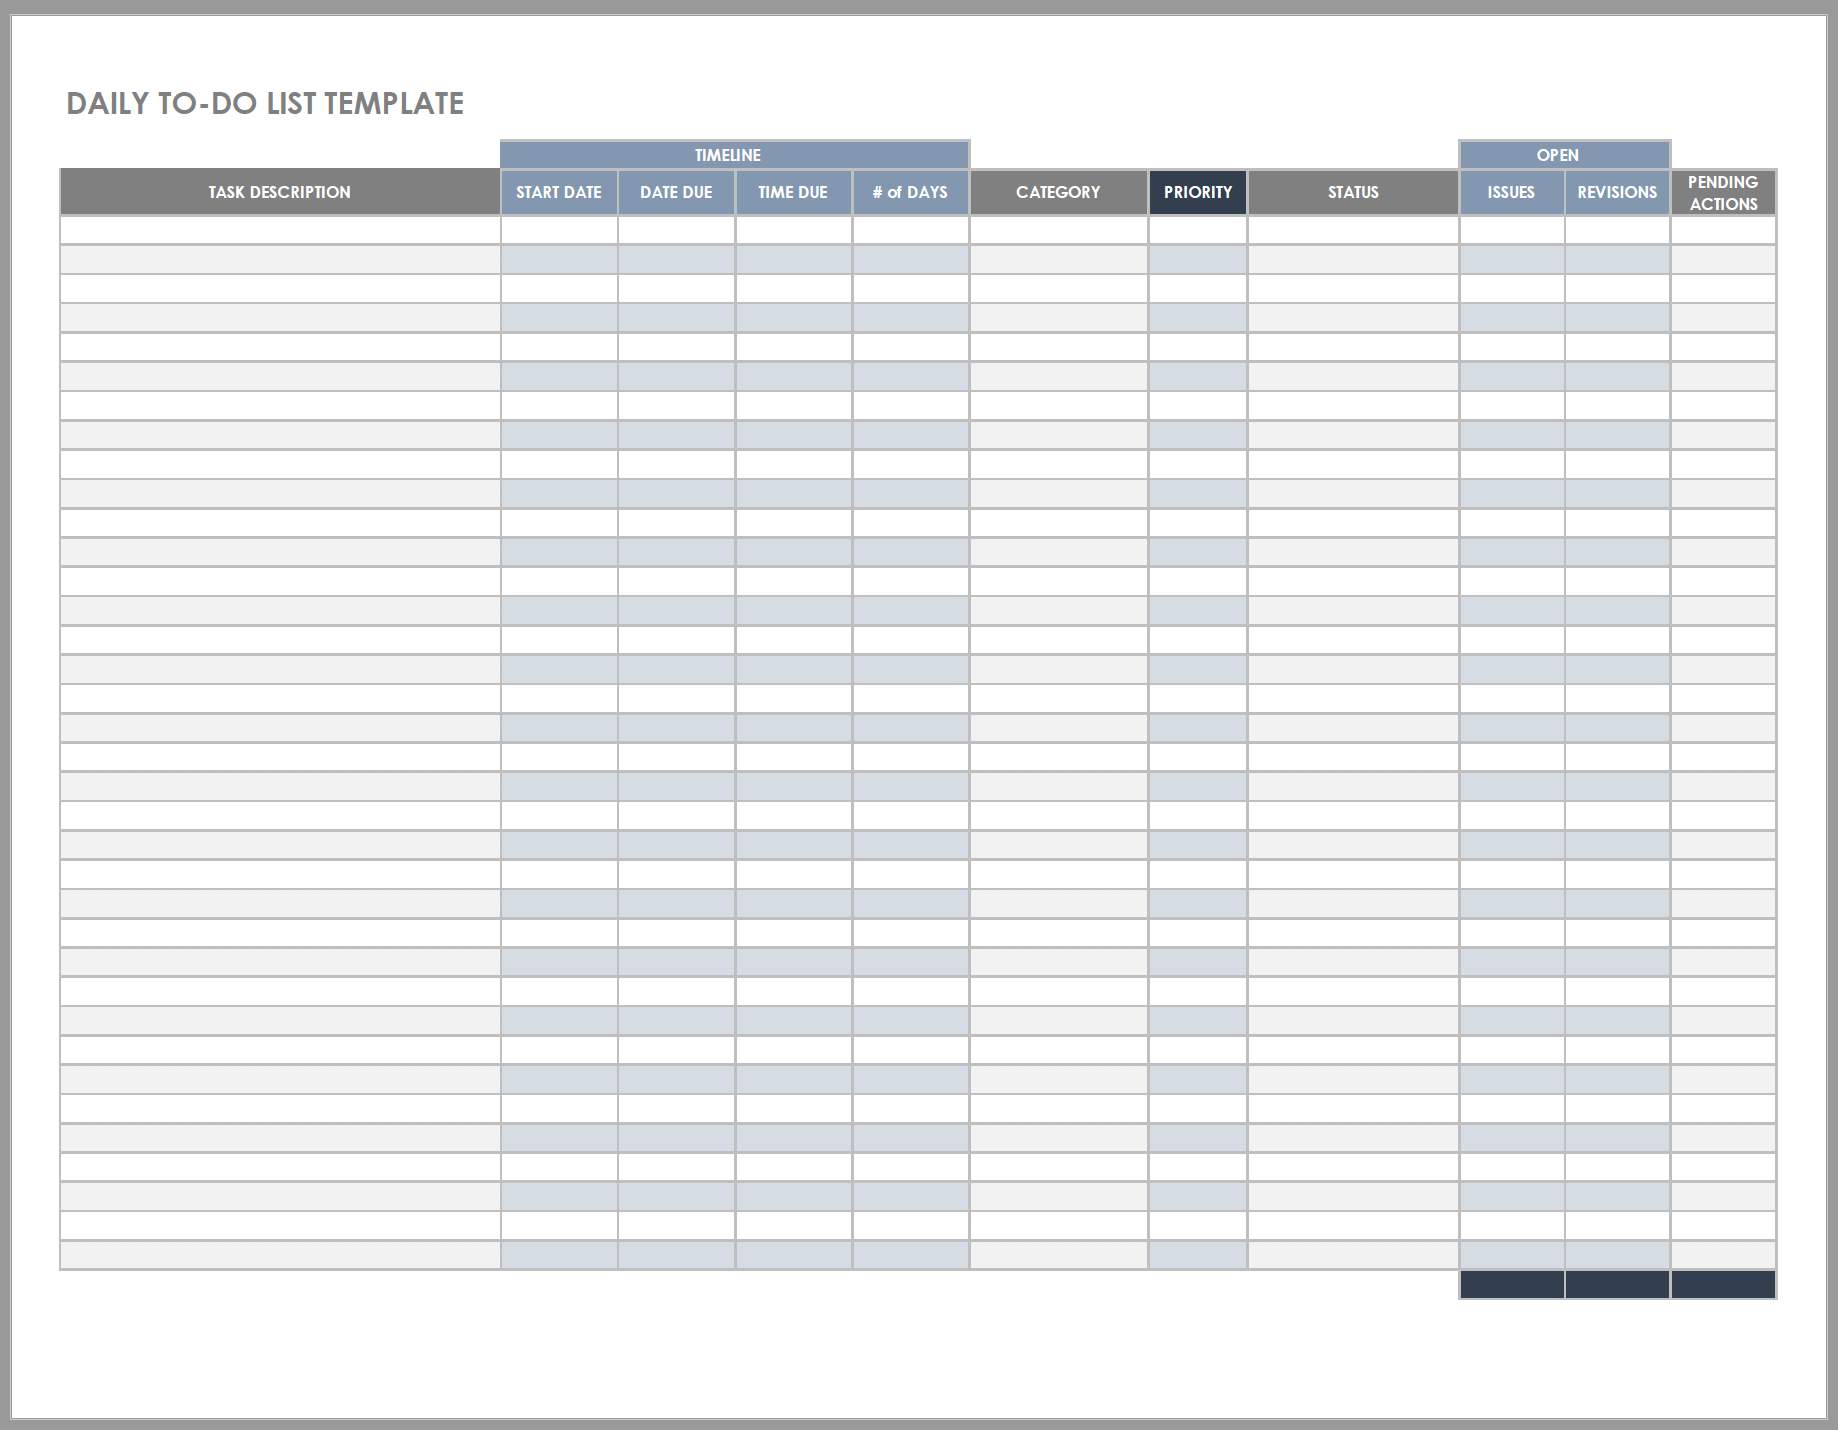 Daily Cleaning Log Template from www.smartsheet.com